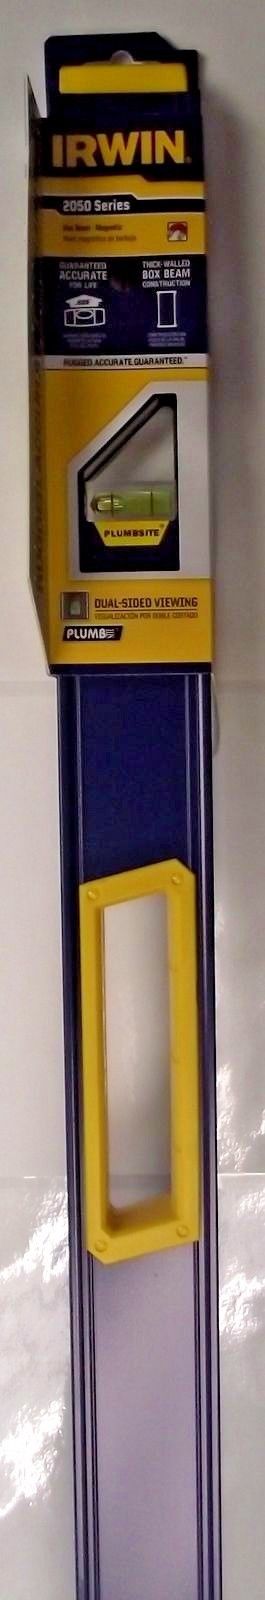 IRWIN 1921979 2050 Series 48" Thick Walled Magnetic Box Beam Level